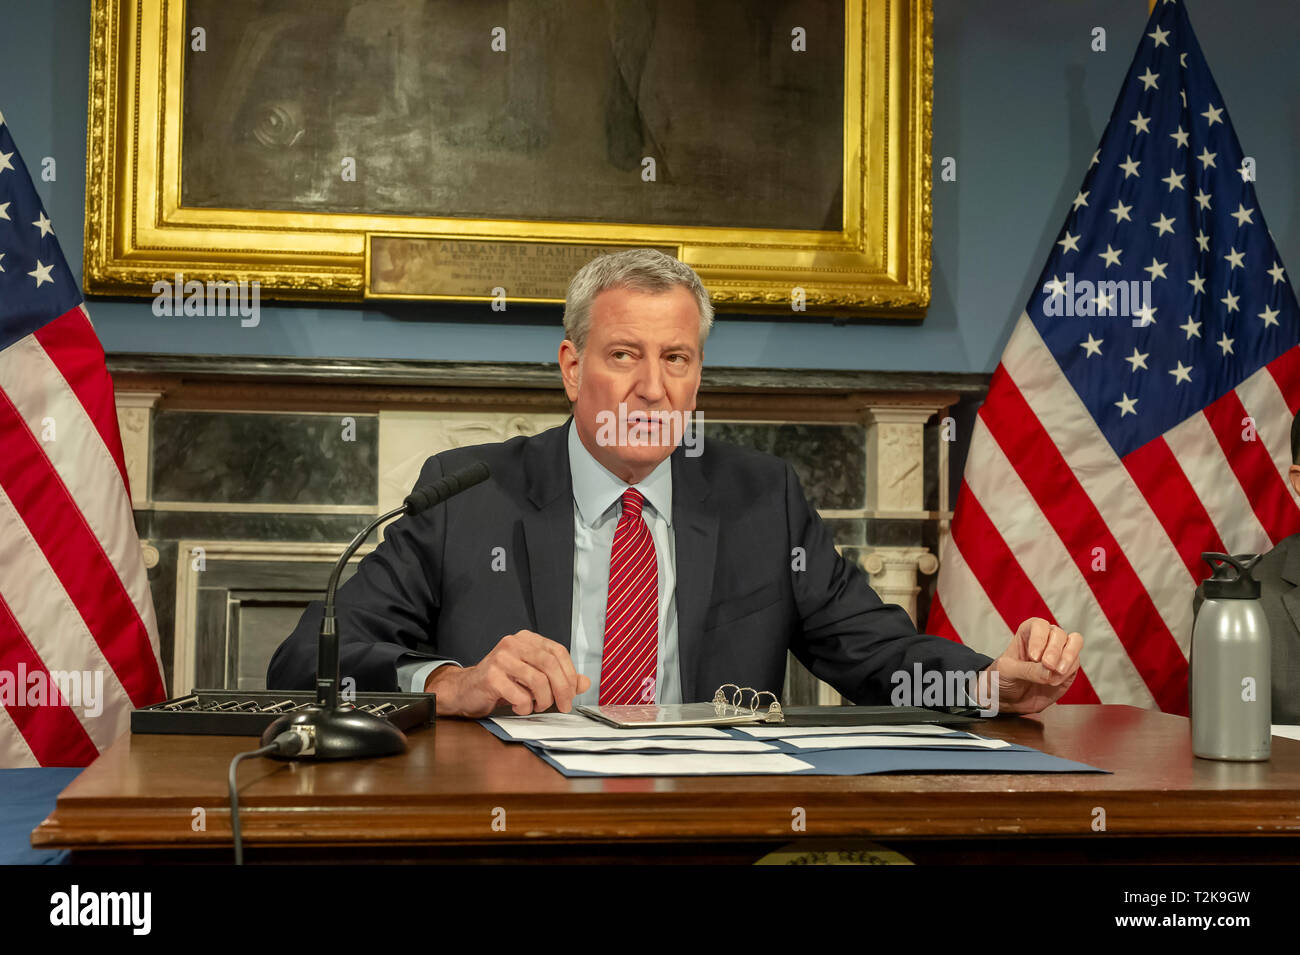 New York Mayor Bill de Blasio, at a bill signing for Intro. 1329-A, related to protection of workers in the commercial waste industry, in the Blue Room in New York City Hall, on Monday, March 18, 2019. The mayor recently returned from New Hampshire where he announced that he would decide whether he will run for president 'sooner rather than later'. (Â© Frances M. Roberts) Stock Photo